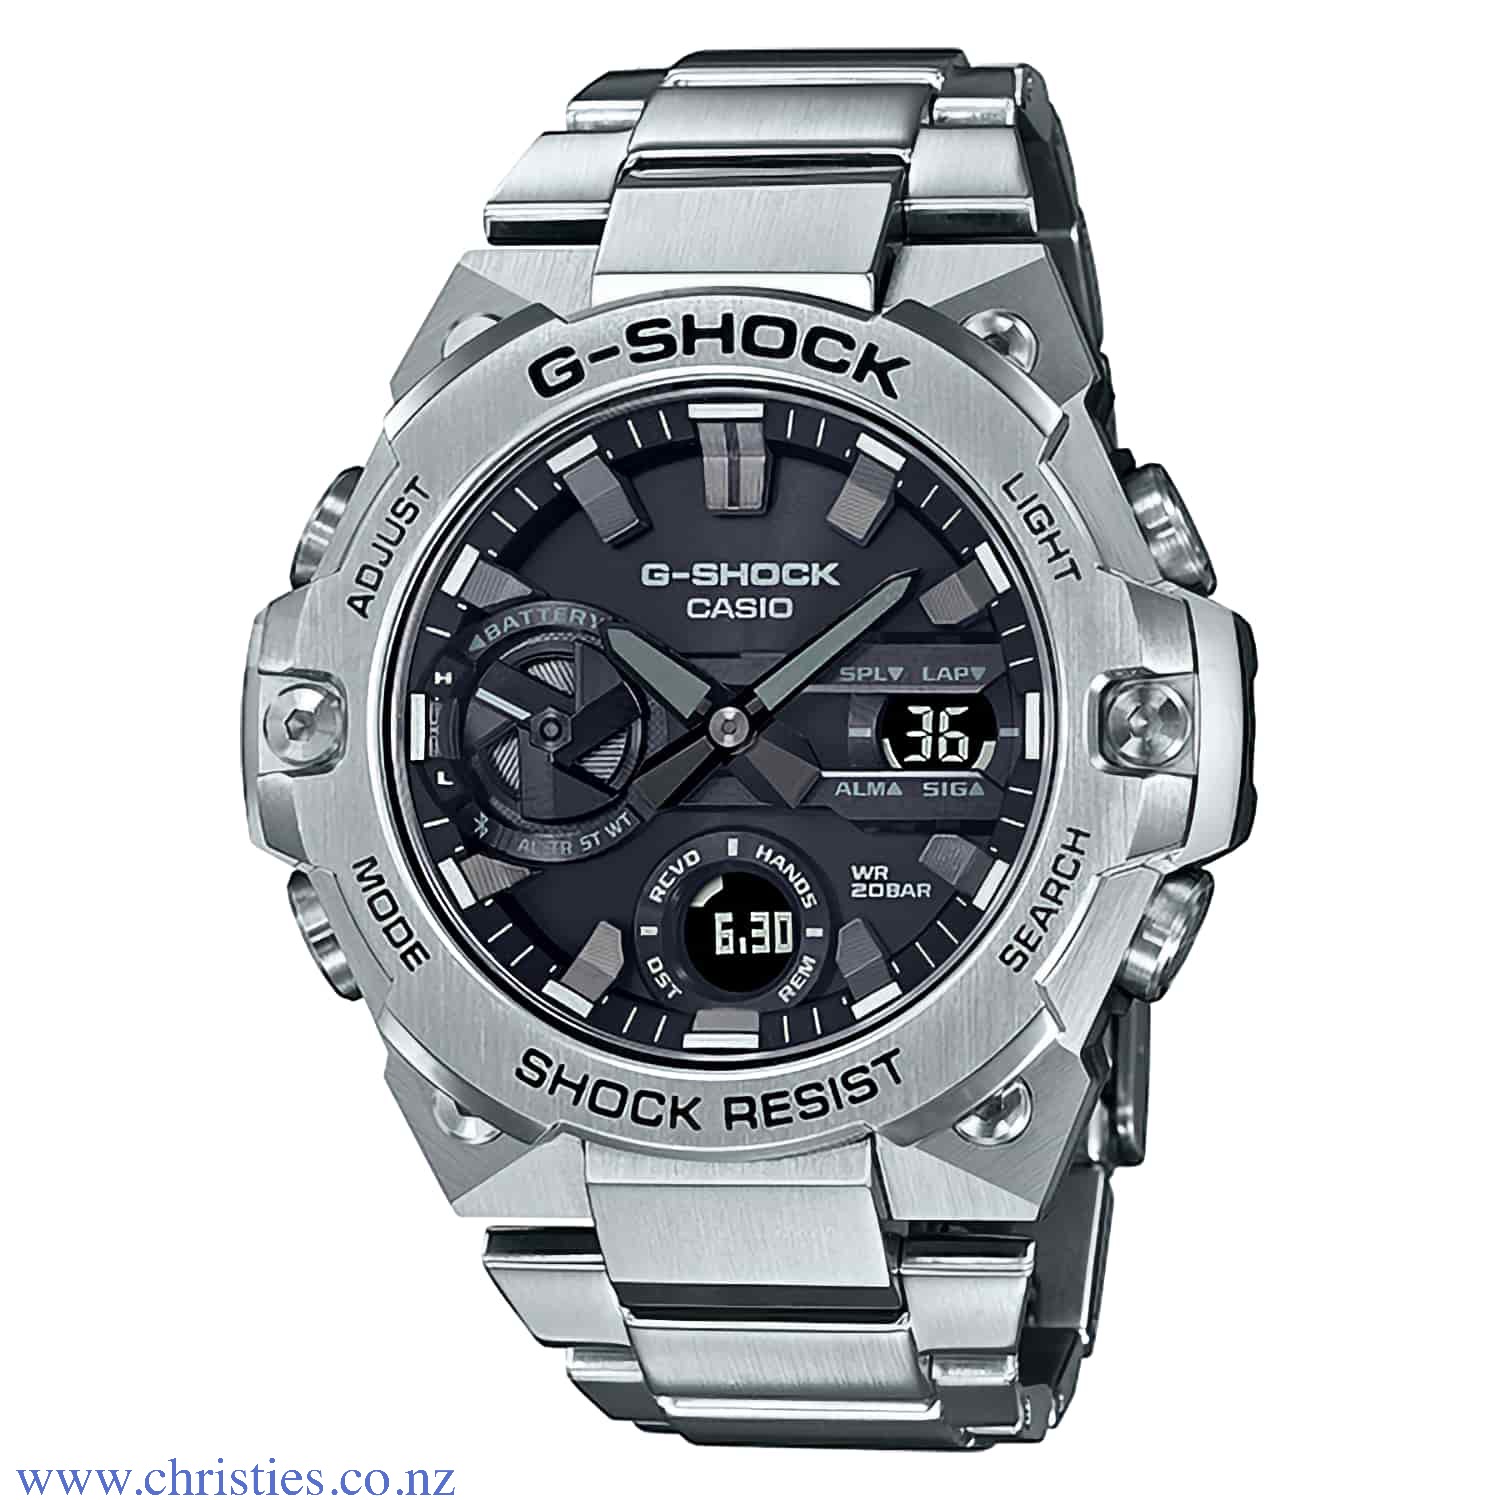 GSTB400D-1A Casio G-Shock G-STEEL Watch. Introducing new colour variations to the lineup of slim G-STEEL GST-B400 models with new, improved designs made possible by a thin module and carbon core guard structure. There is a standard model in this lineup, t